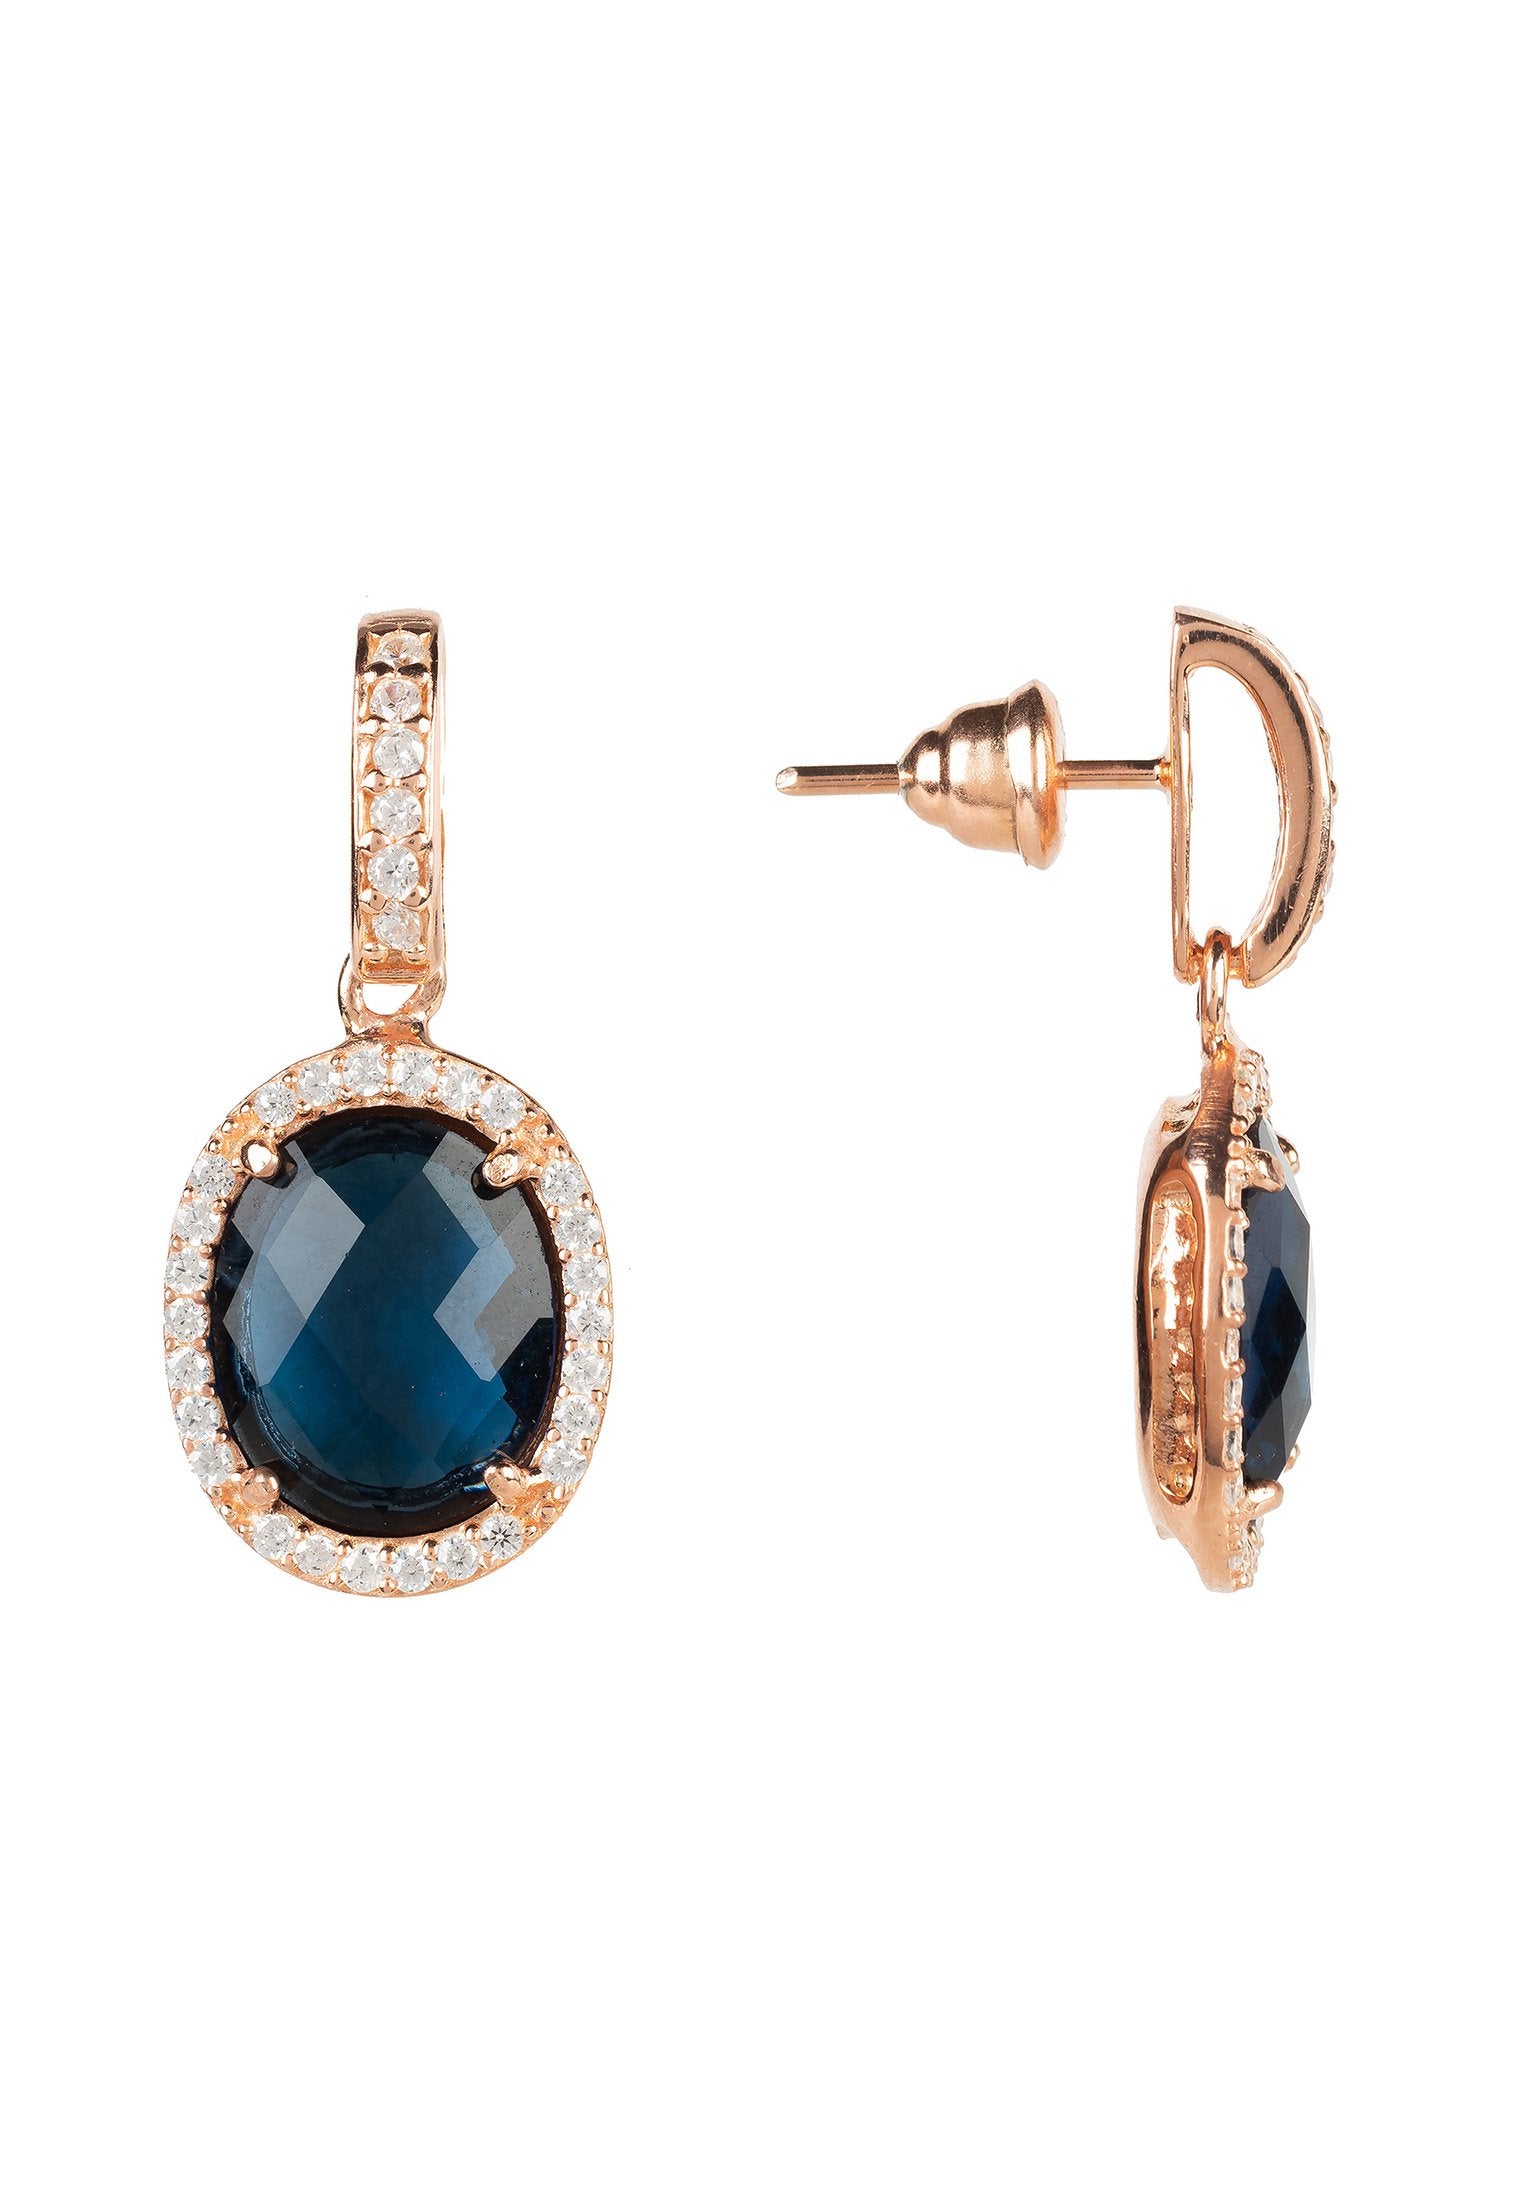 Regal Oval Gemstone Drop Earrings in Rose Gold with Sapphire Hydro - Ideal for Evening Attire and Birthdays - Jewelry & Watches - Bijou Her -  -  - 